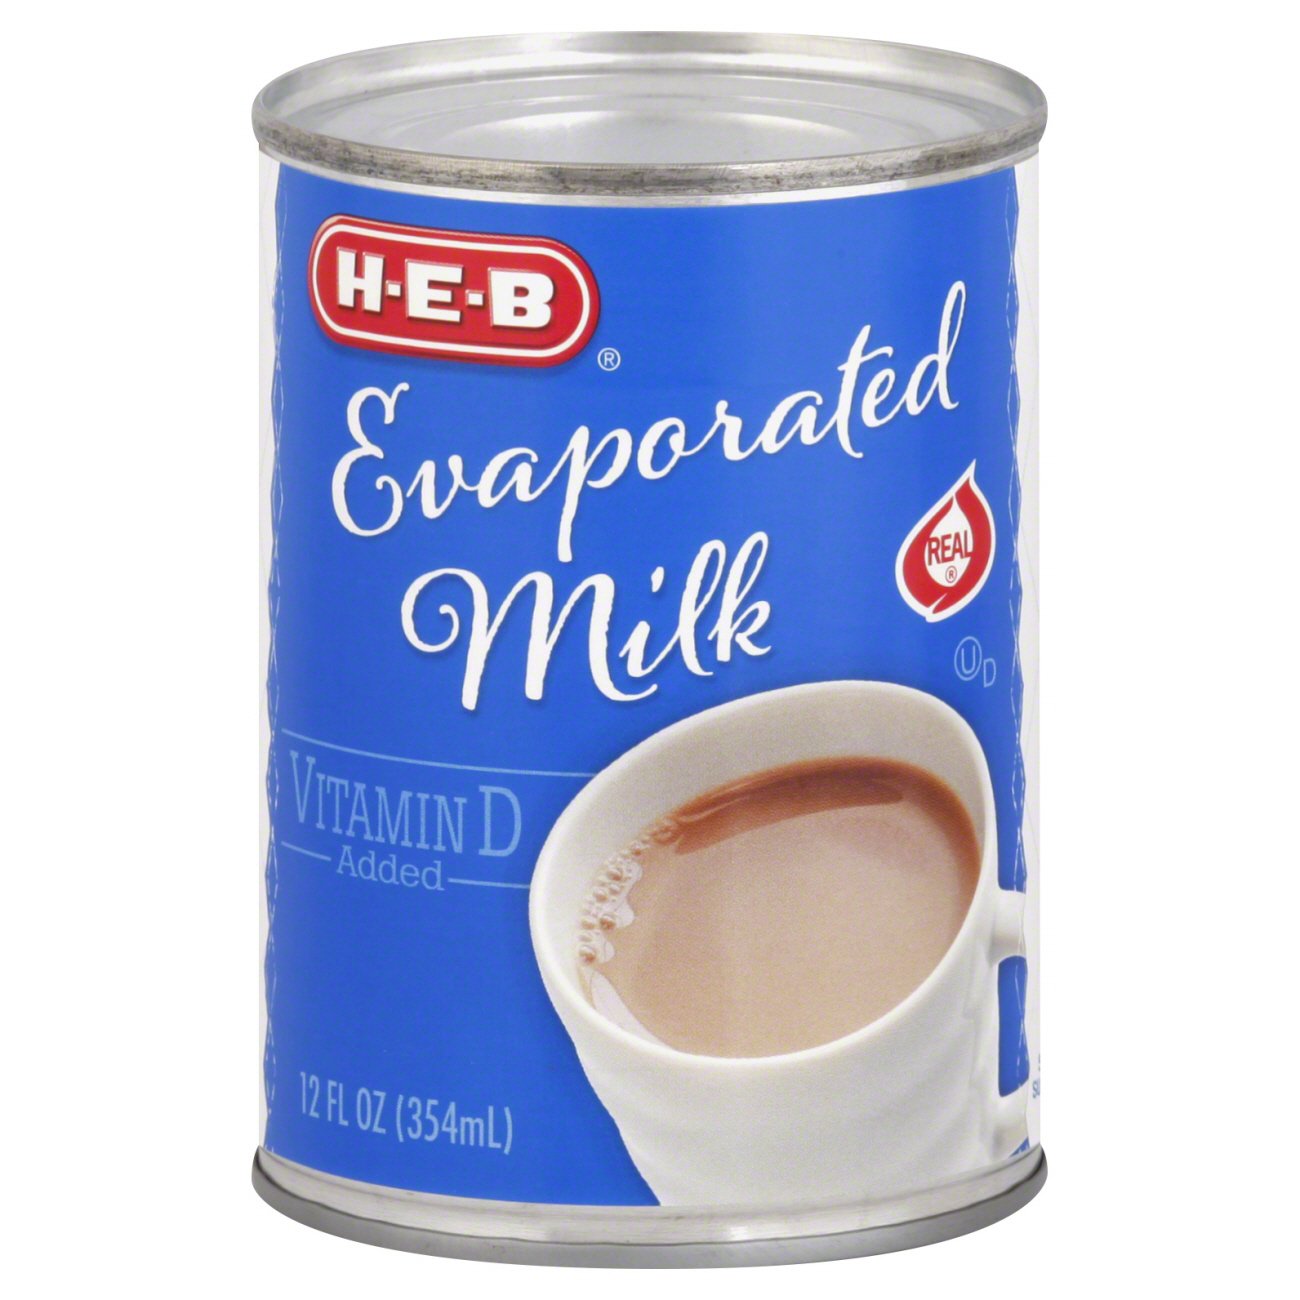 can puppy drink evaporated milk